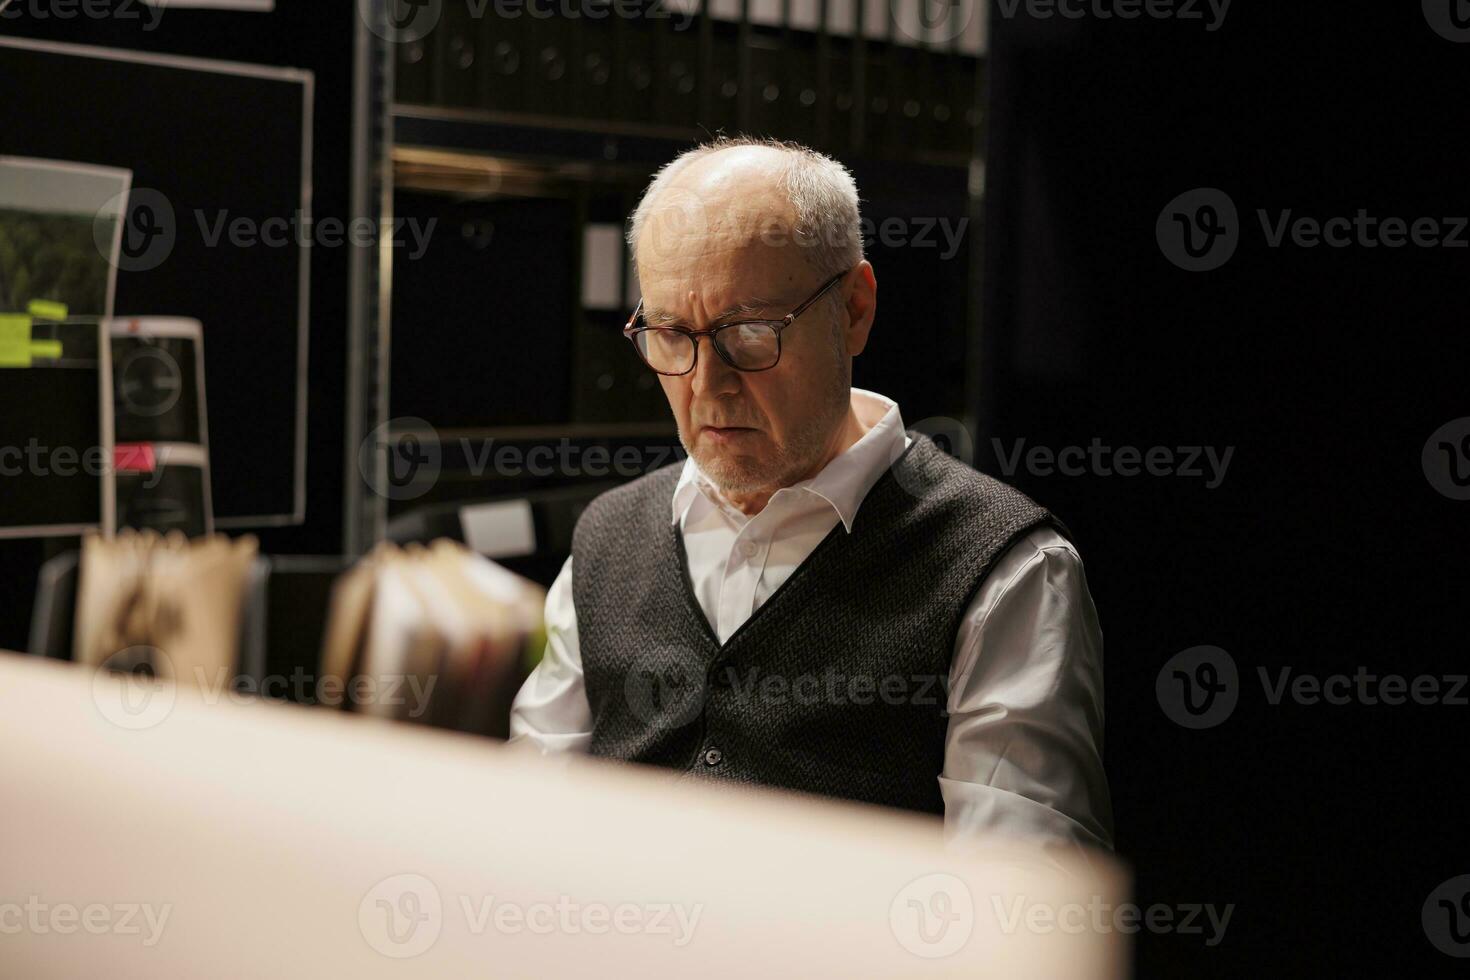 Elderly investigator looking at criminal investigations files, working overtime at mysterious suspect profile in arhive room. Senior police officer analyzing crime scene evidence late at night photo